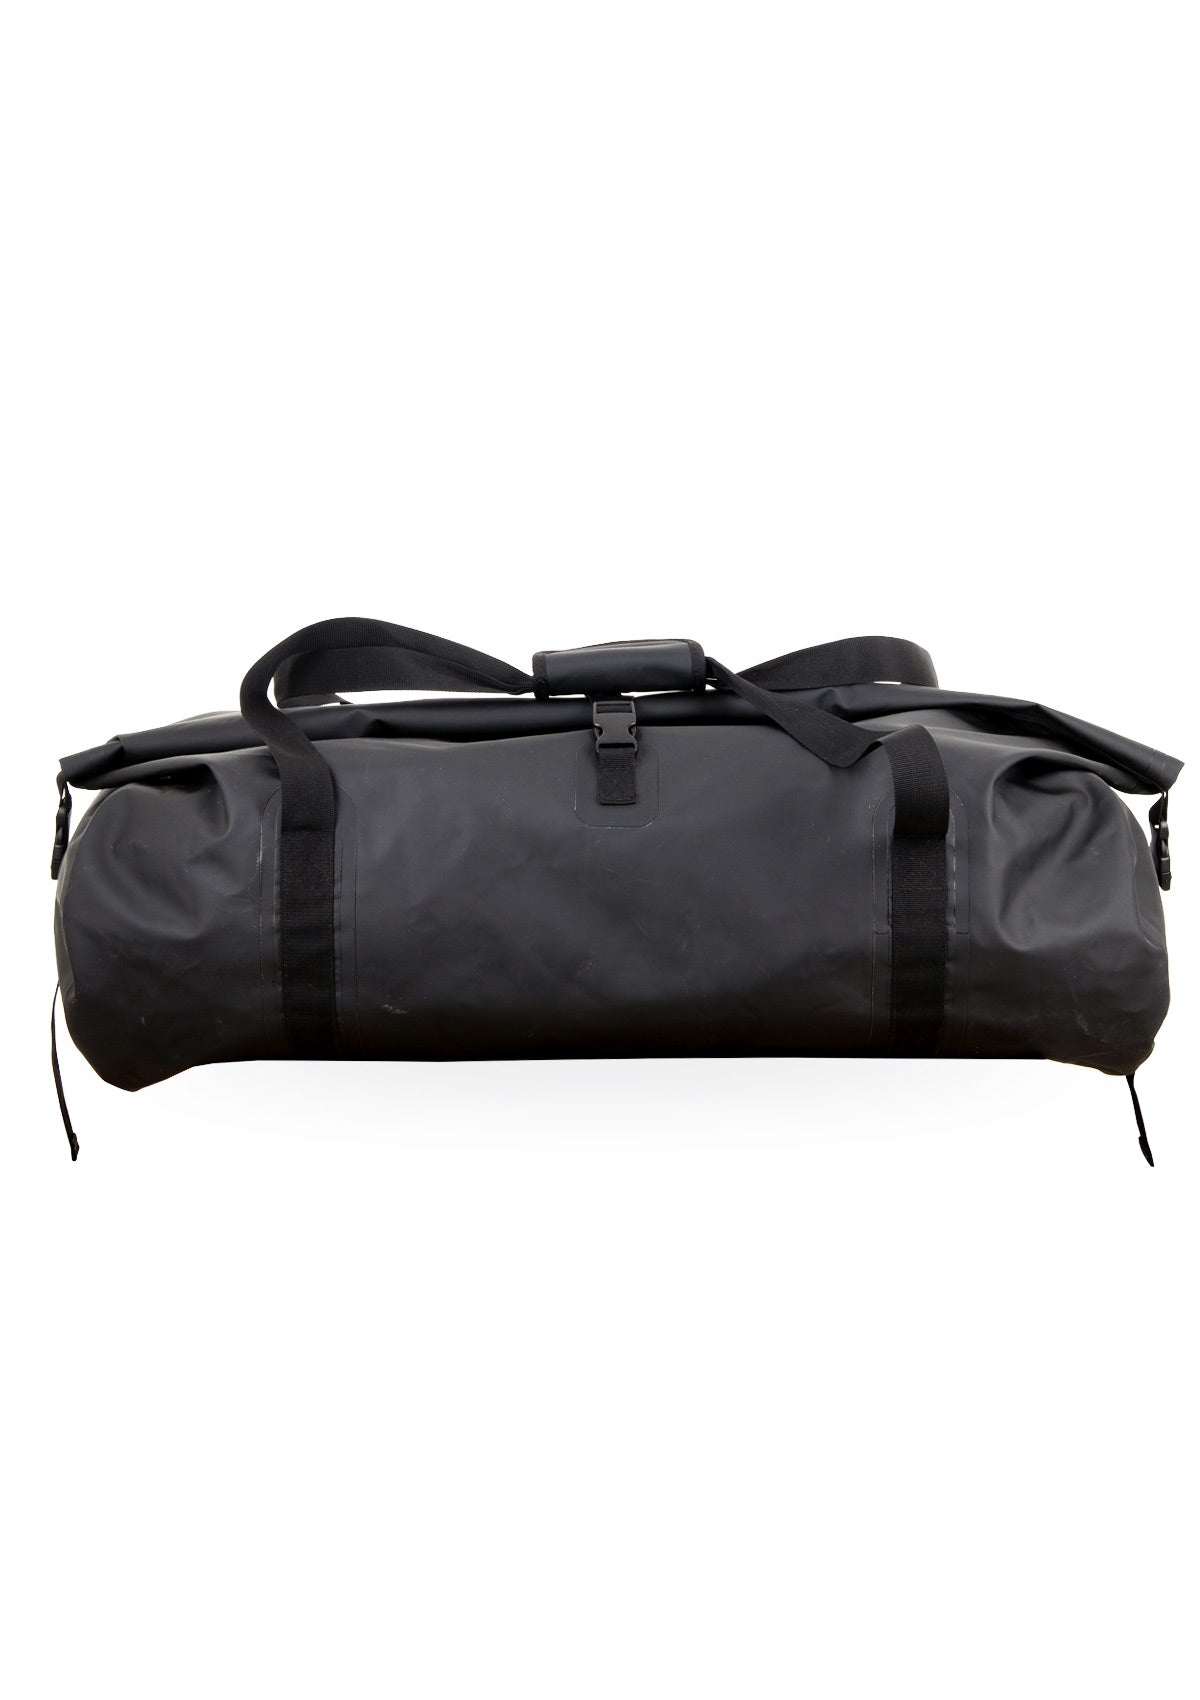 needessentials dry bag duffel travel surfing non branded black